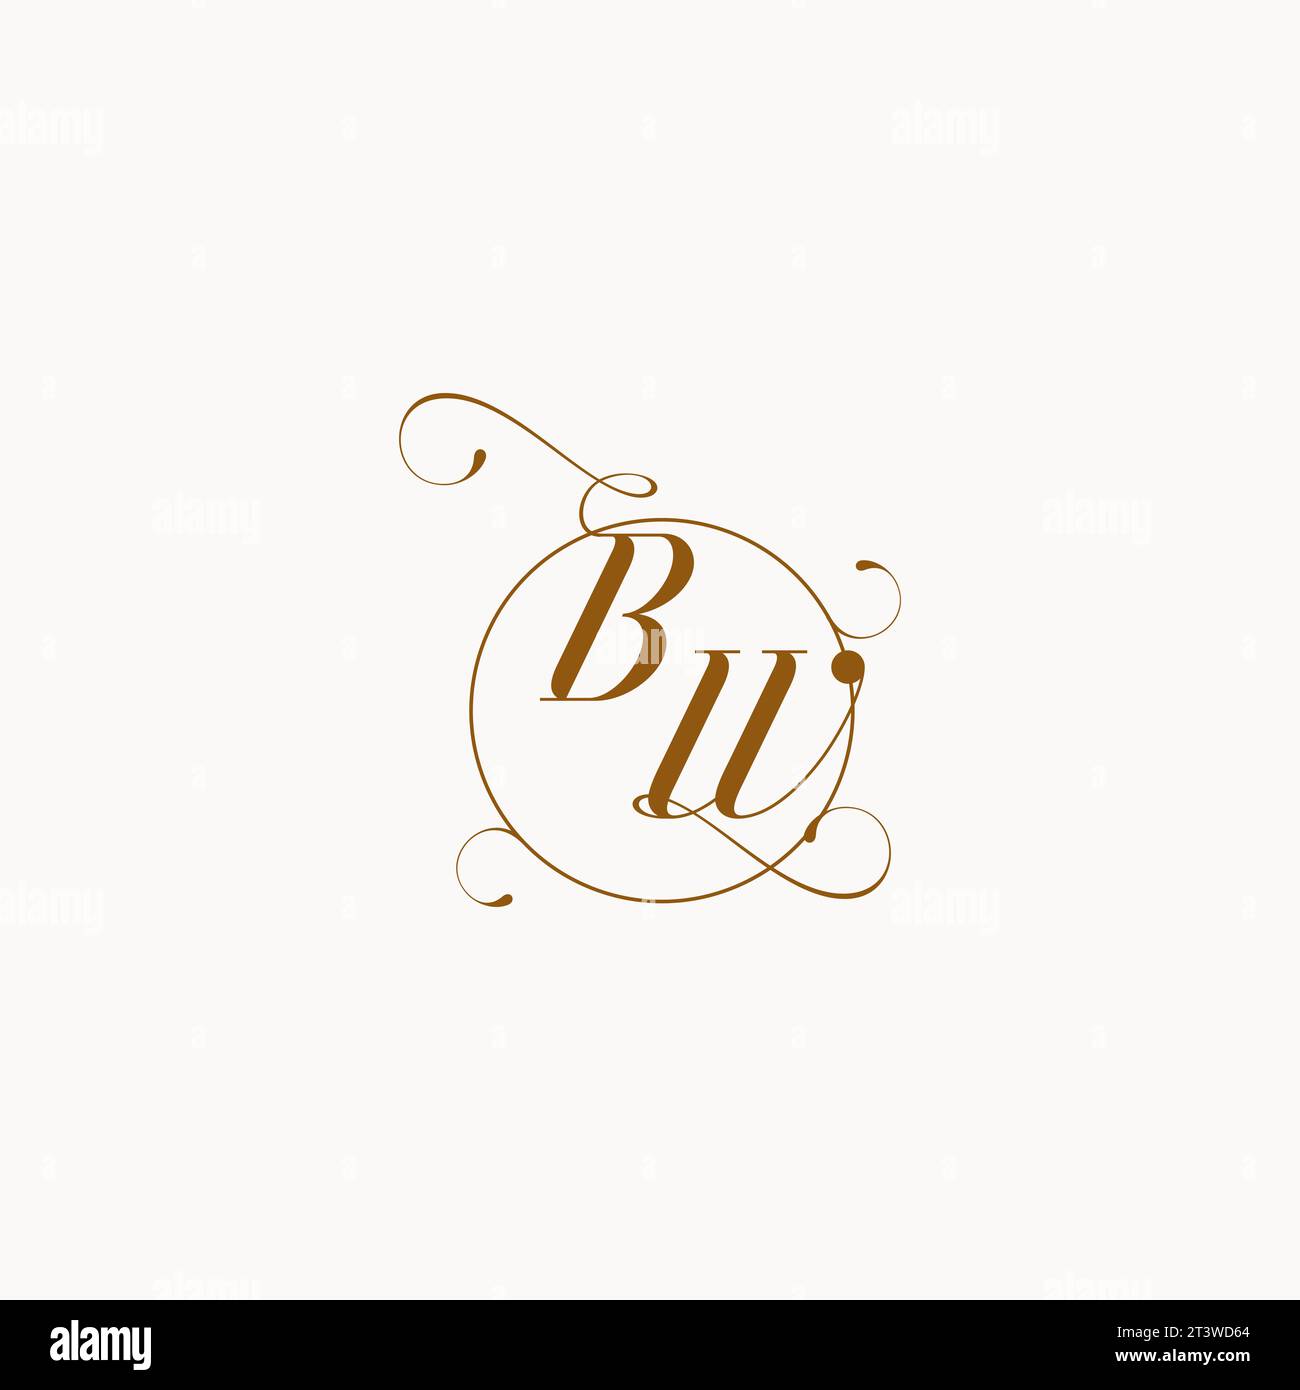 BW uniquely wedding logo symbol of your marriage and you can use it on your wedding stationary Stock Vector